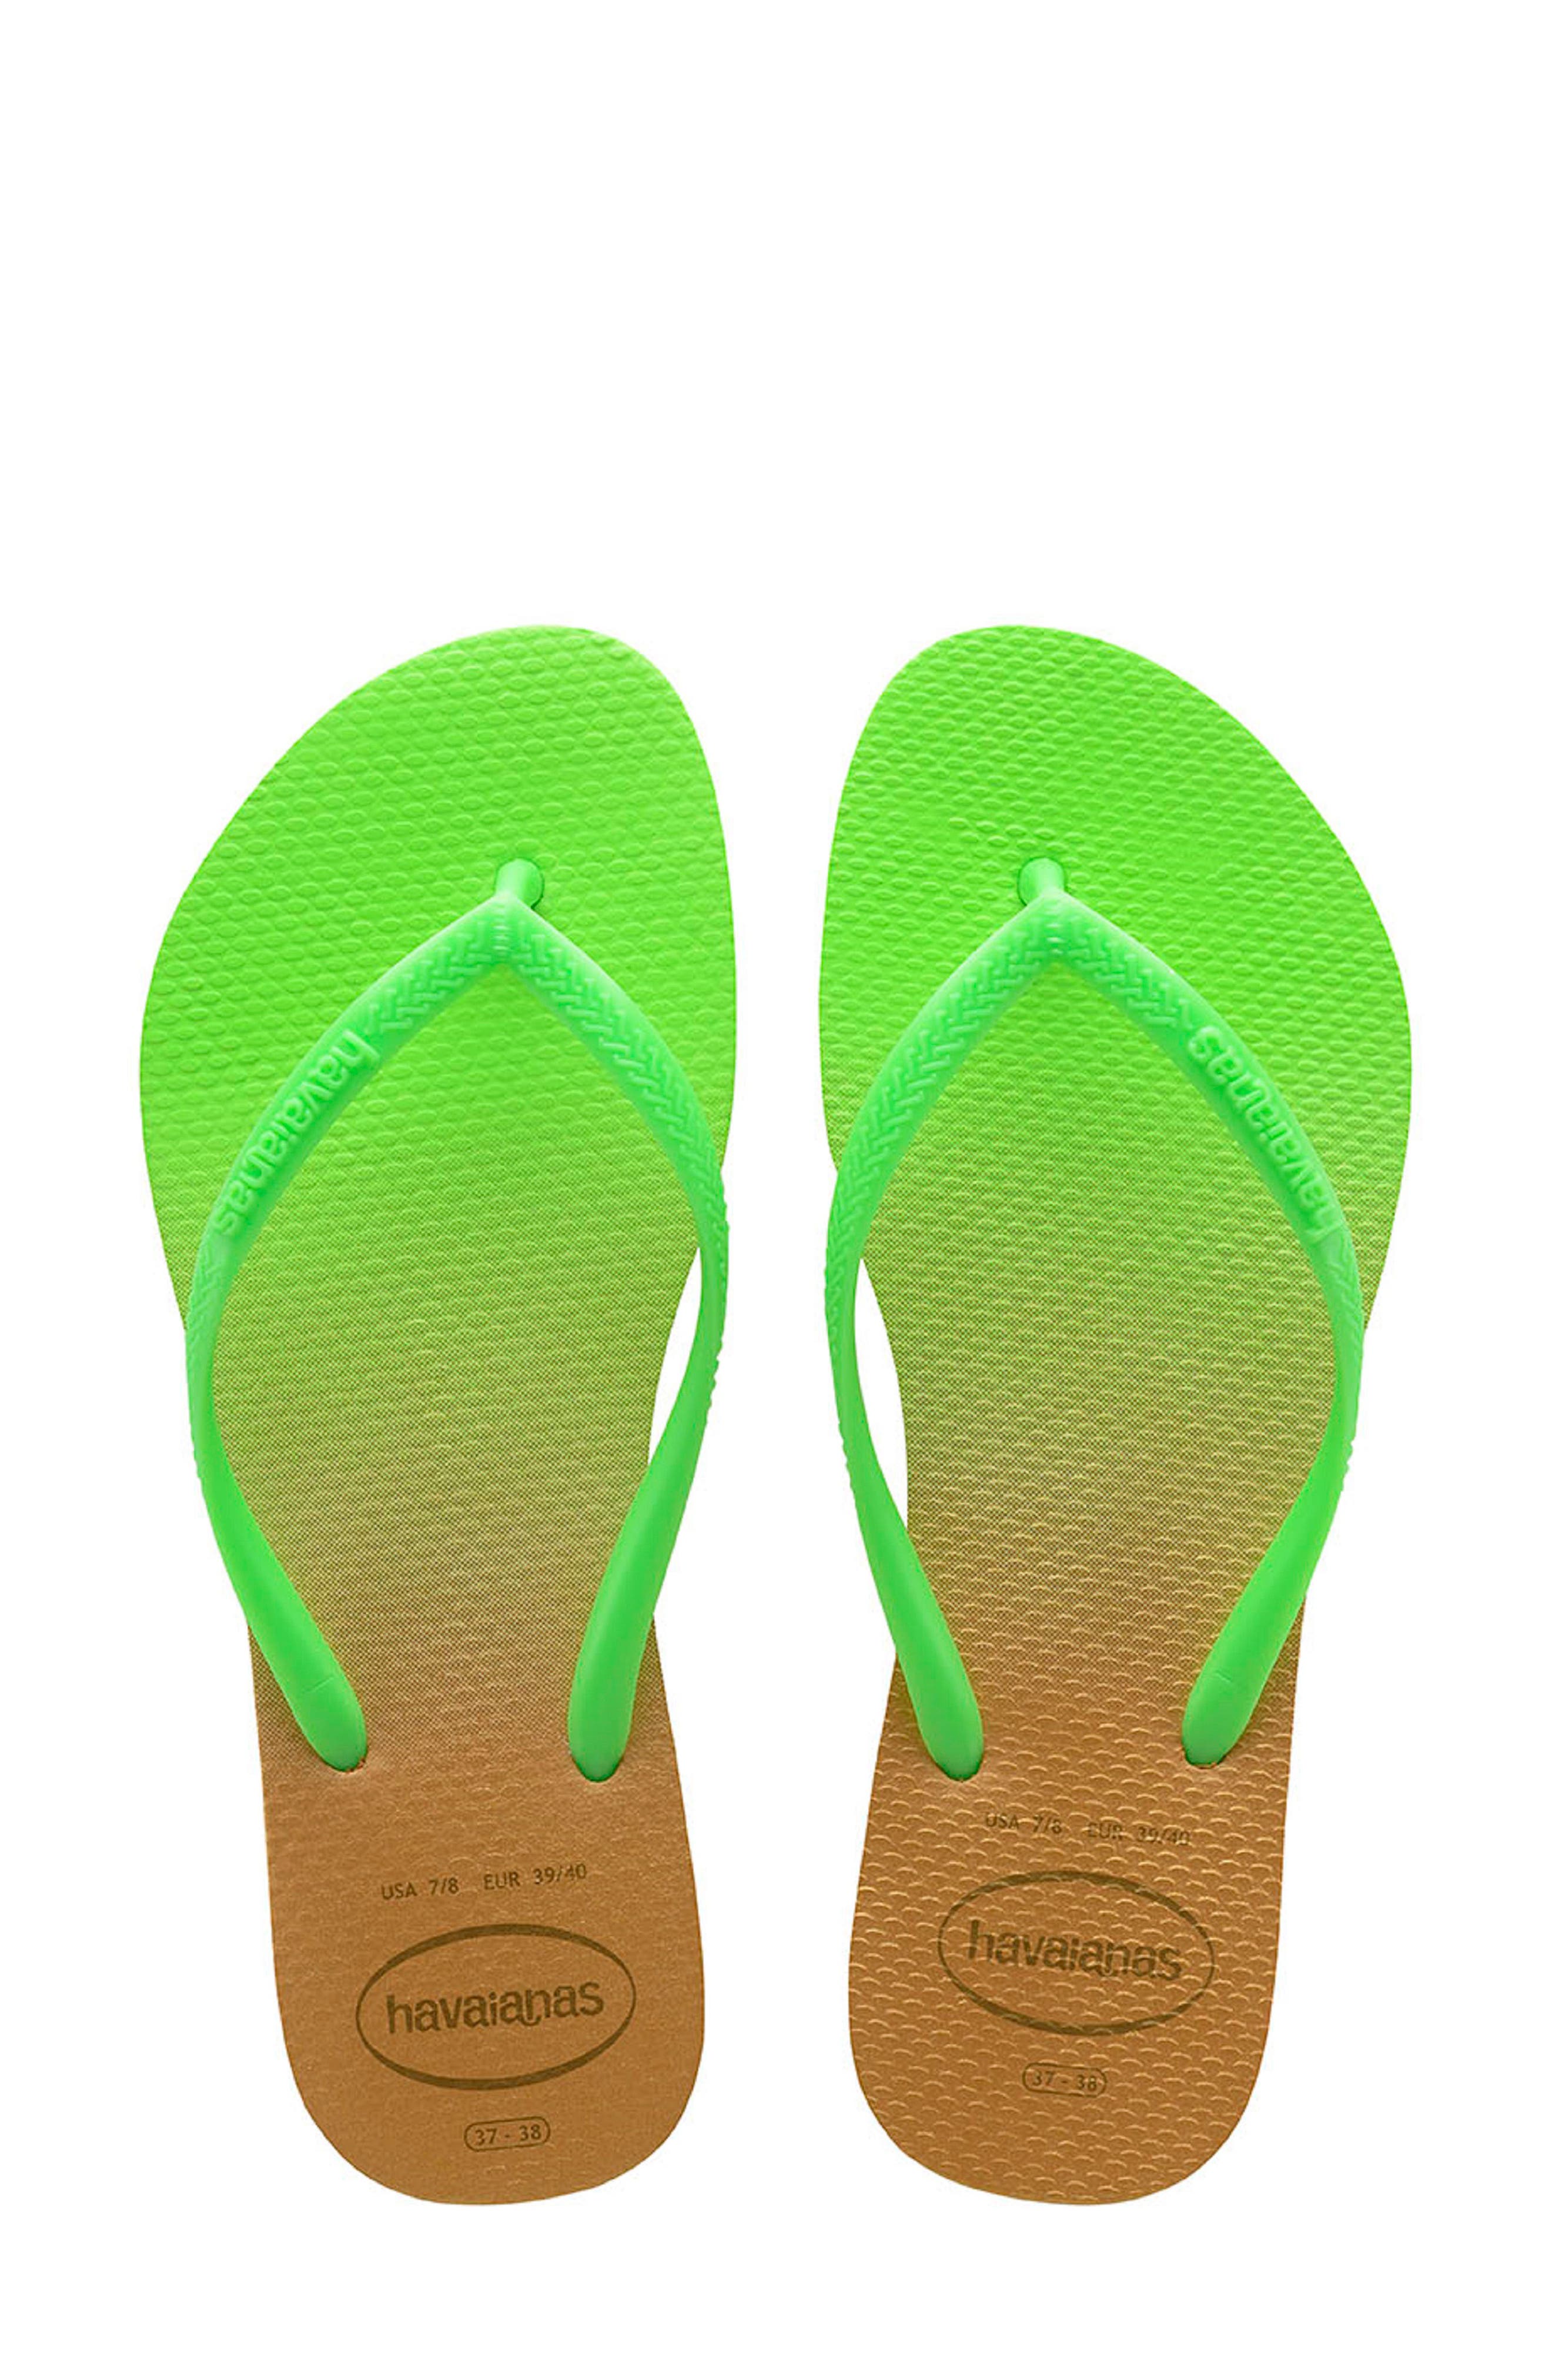 zuur stereo Bijdrager havaianas for sale near me,Quality assurance,protein-burger.com